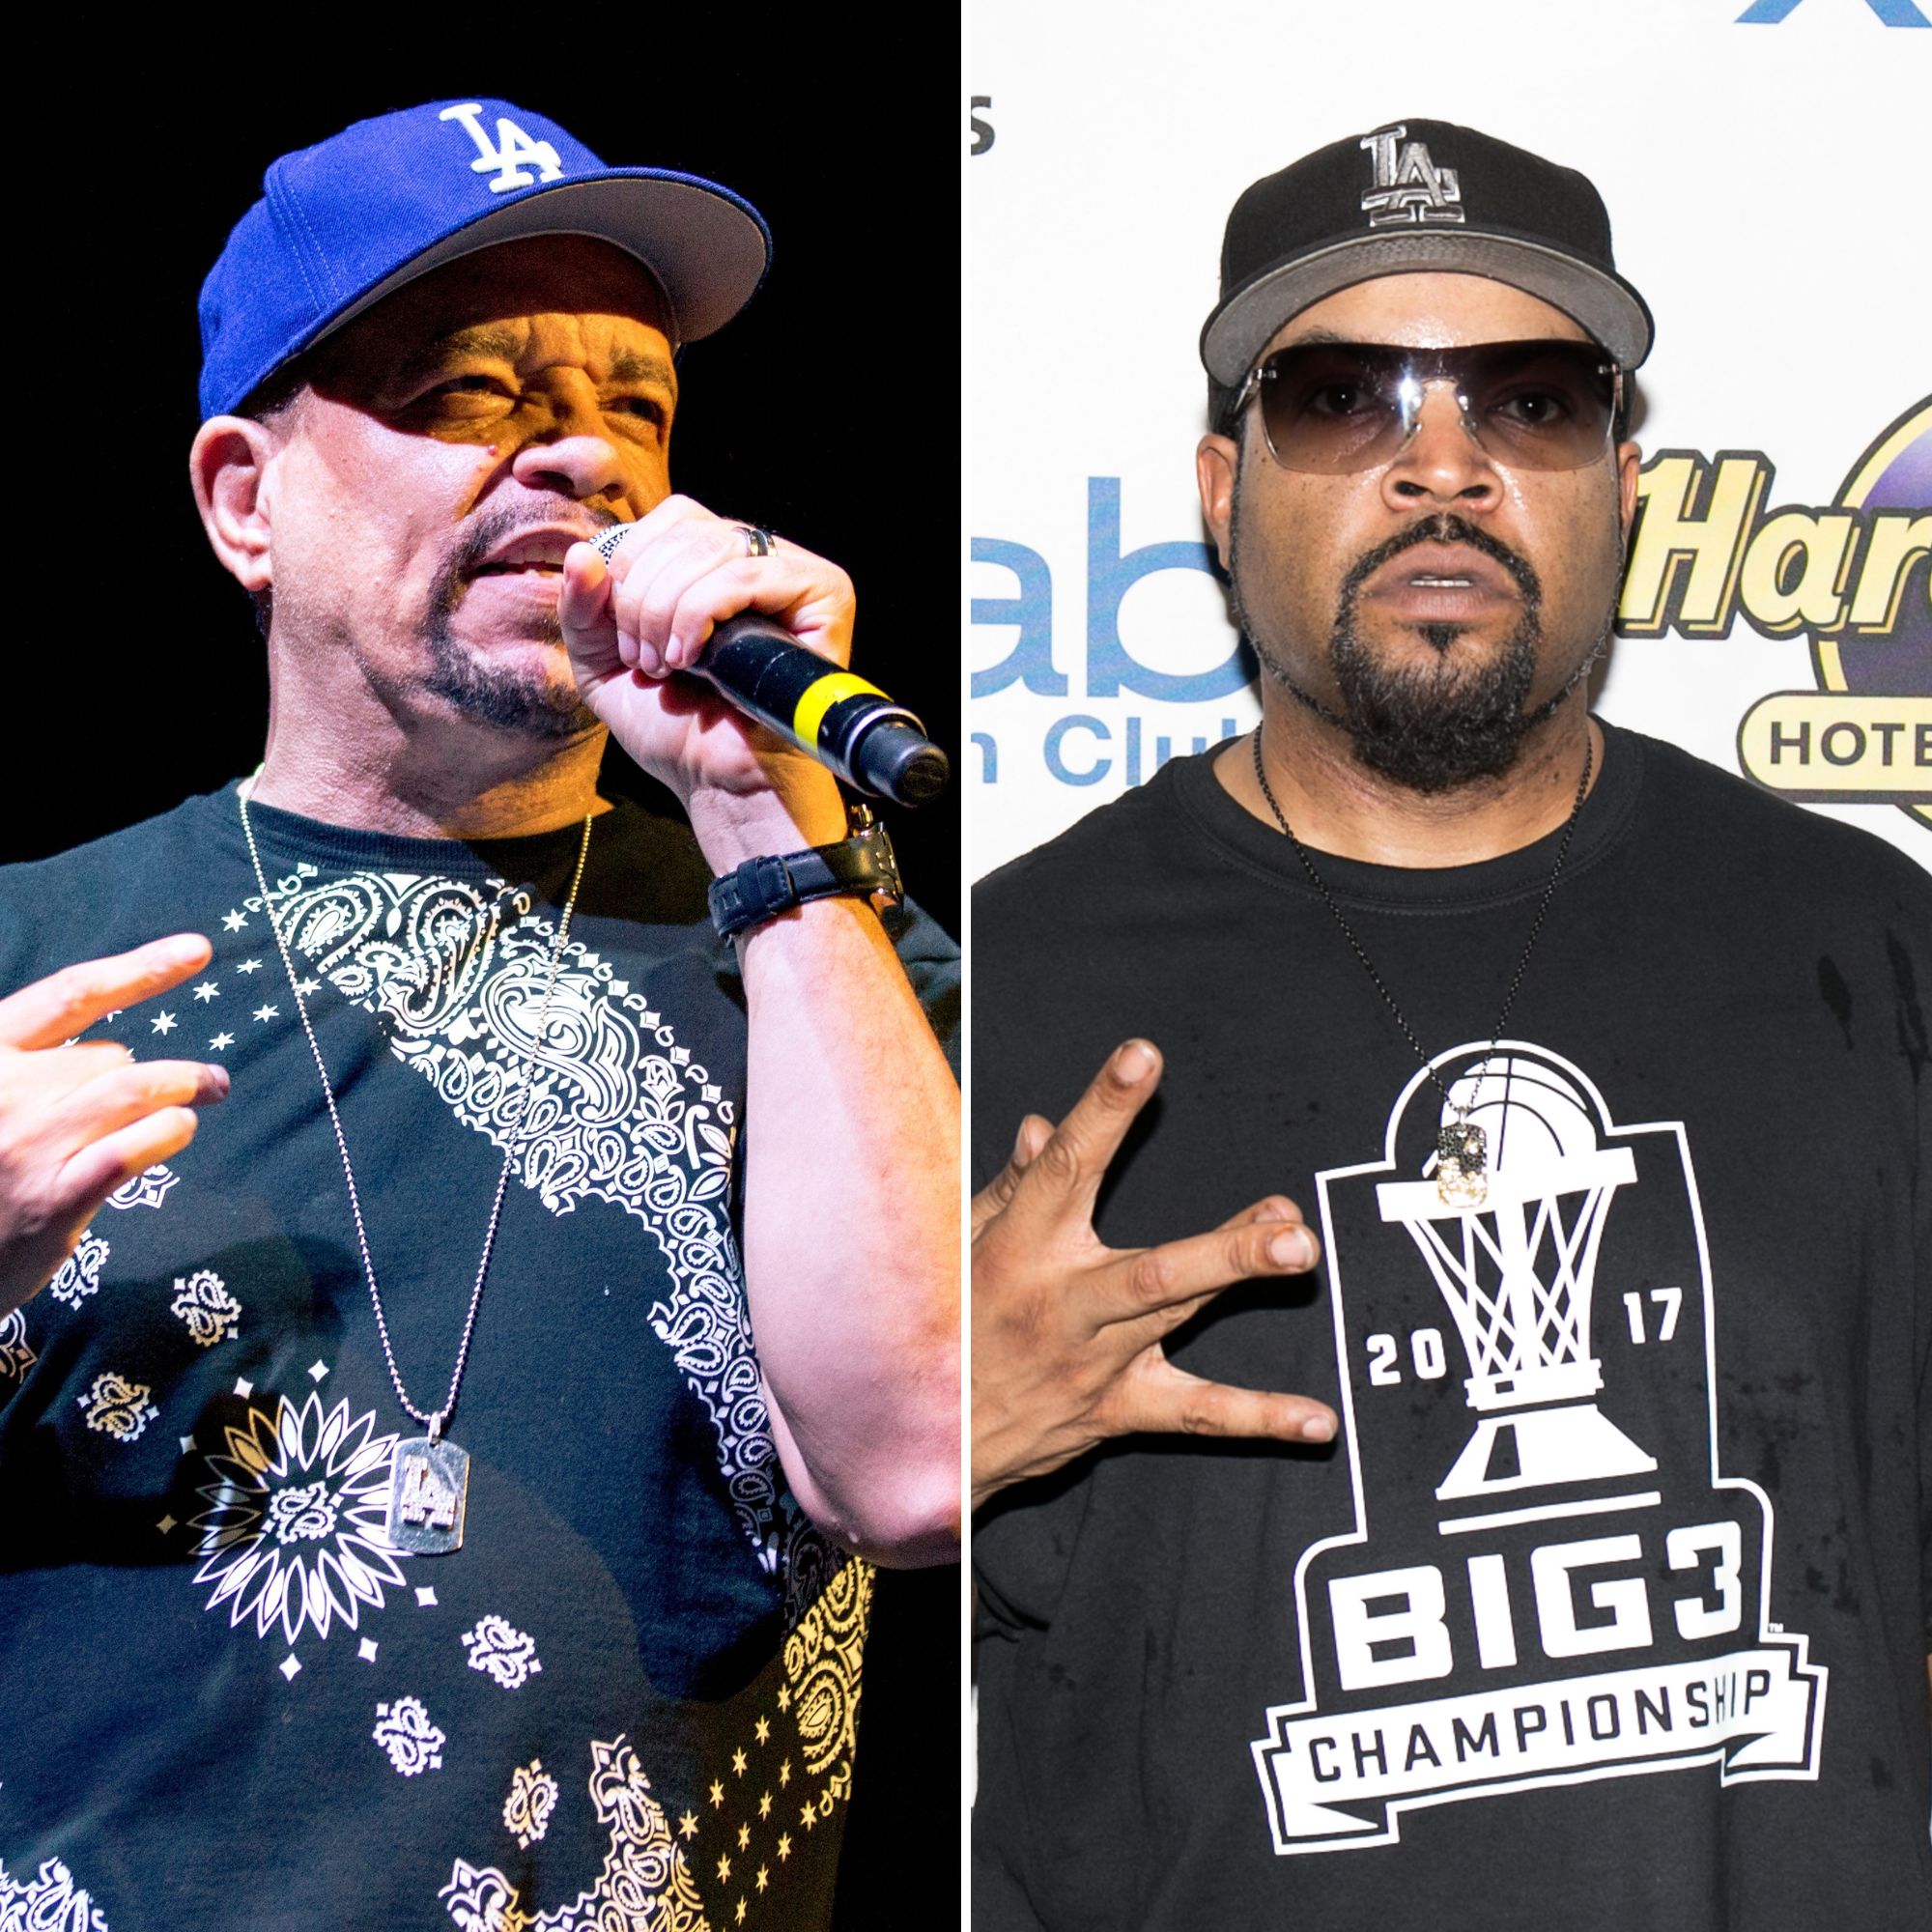 Ice-T and Coco Austin Best Clapbacks at Haters, Trolls pic